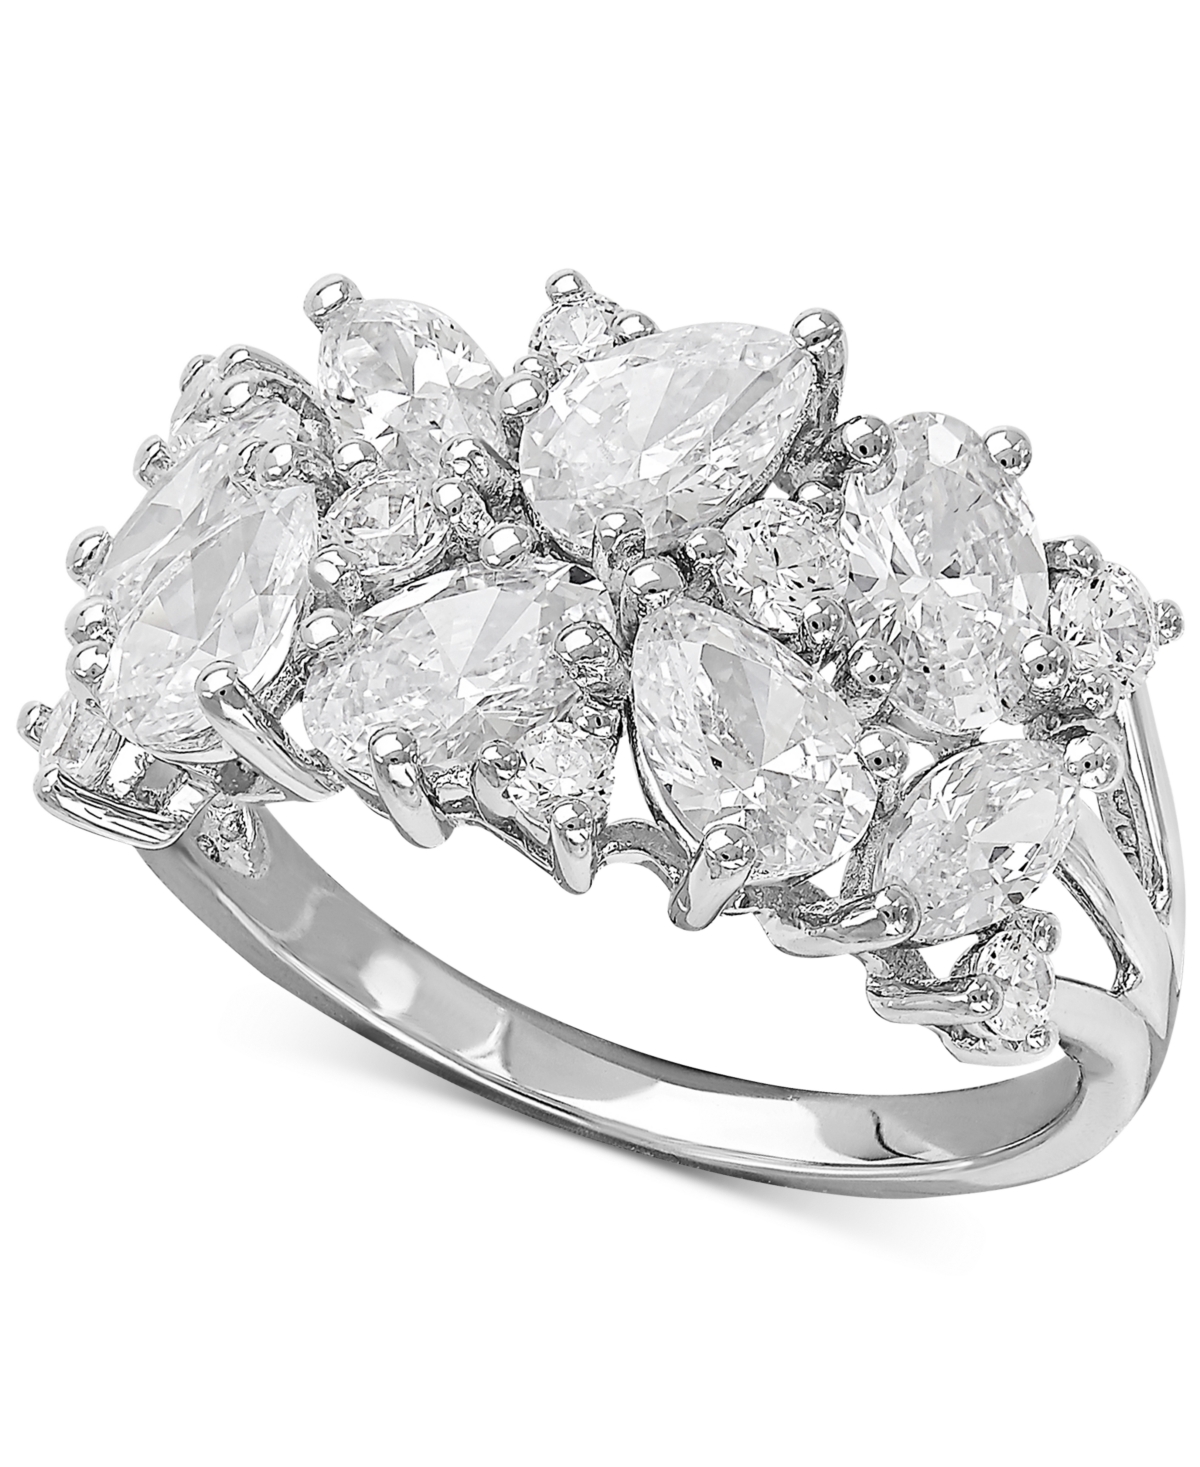 Cubic Zirconia Cluster Ring in Sterling Silver - Silver